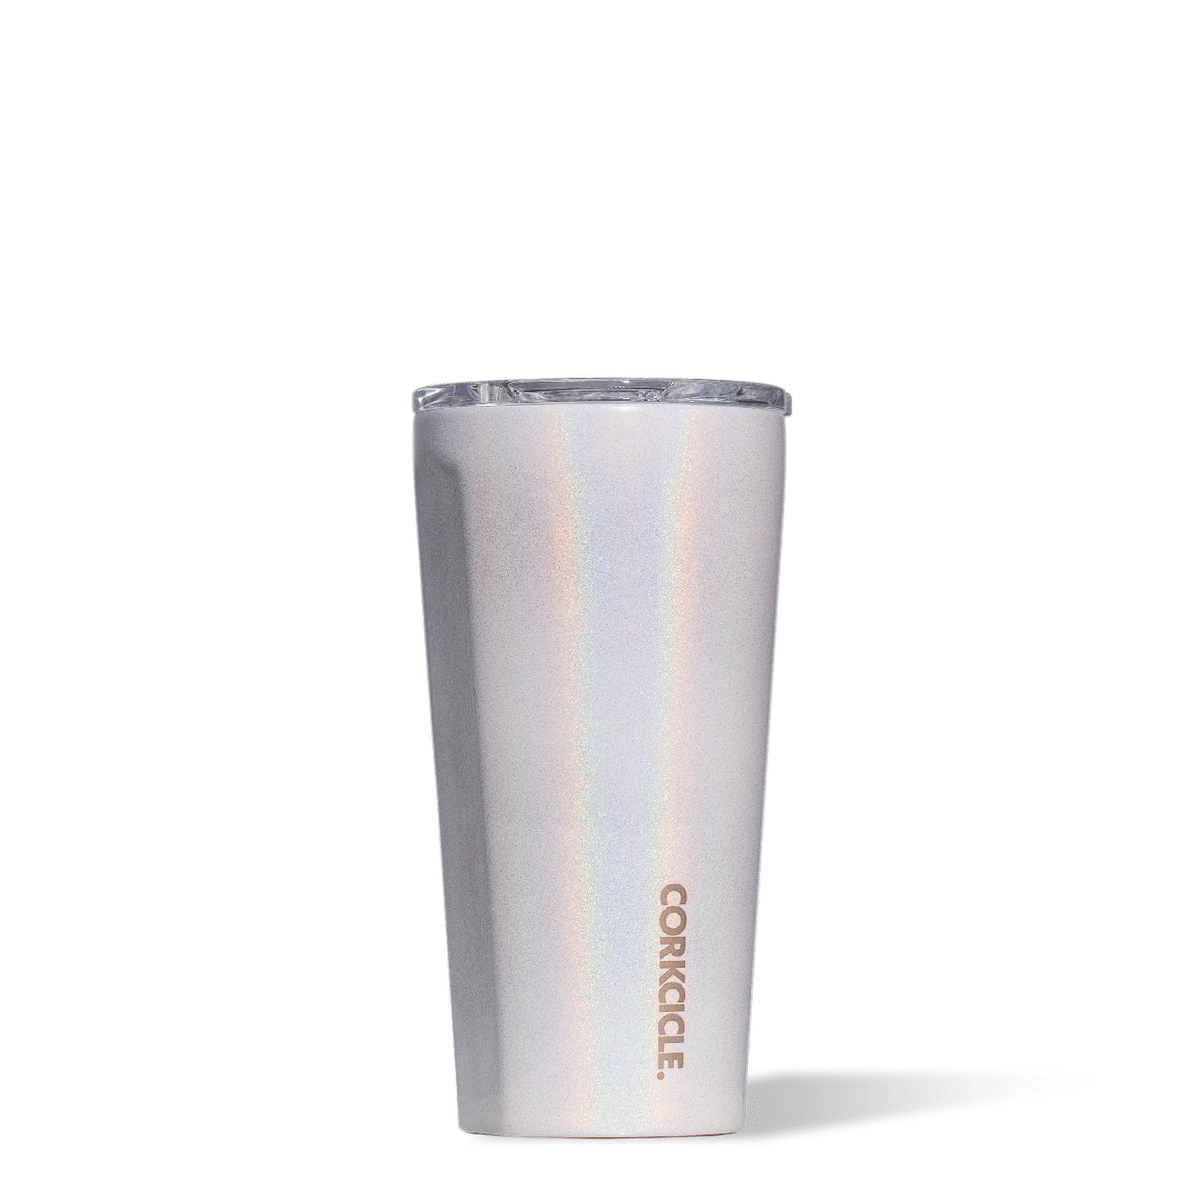 16 oz Tumbler in Prismatic from Corkcicle